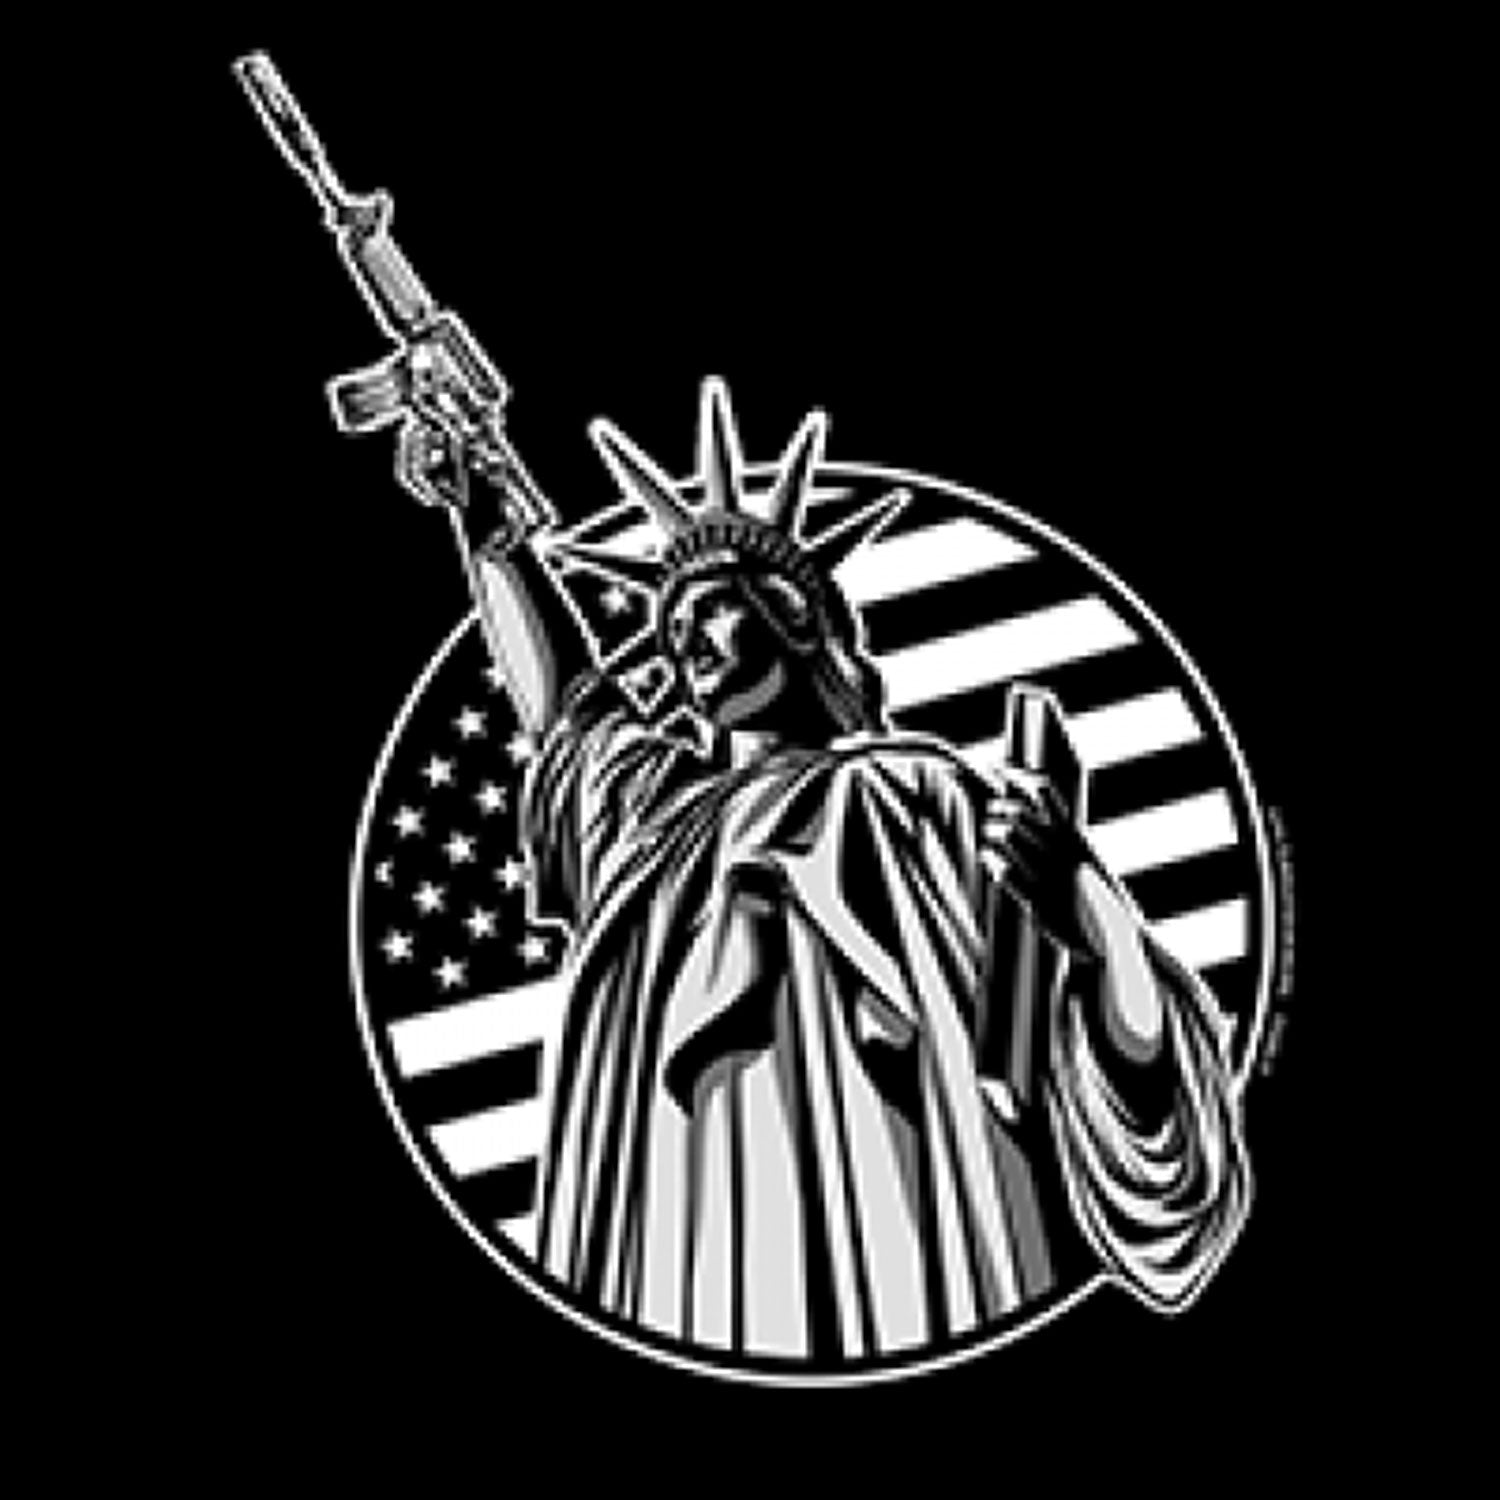 Statue Of Liberty with Flag and Gun Printed T-Shirt